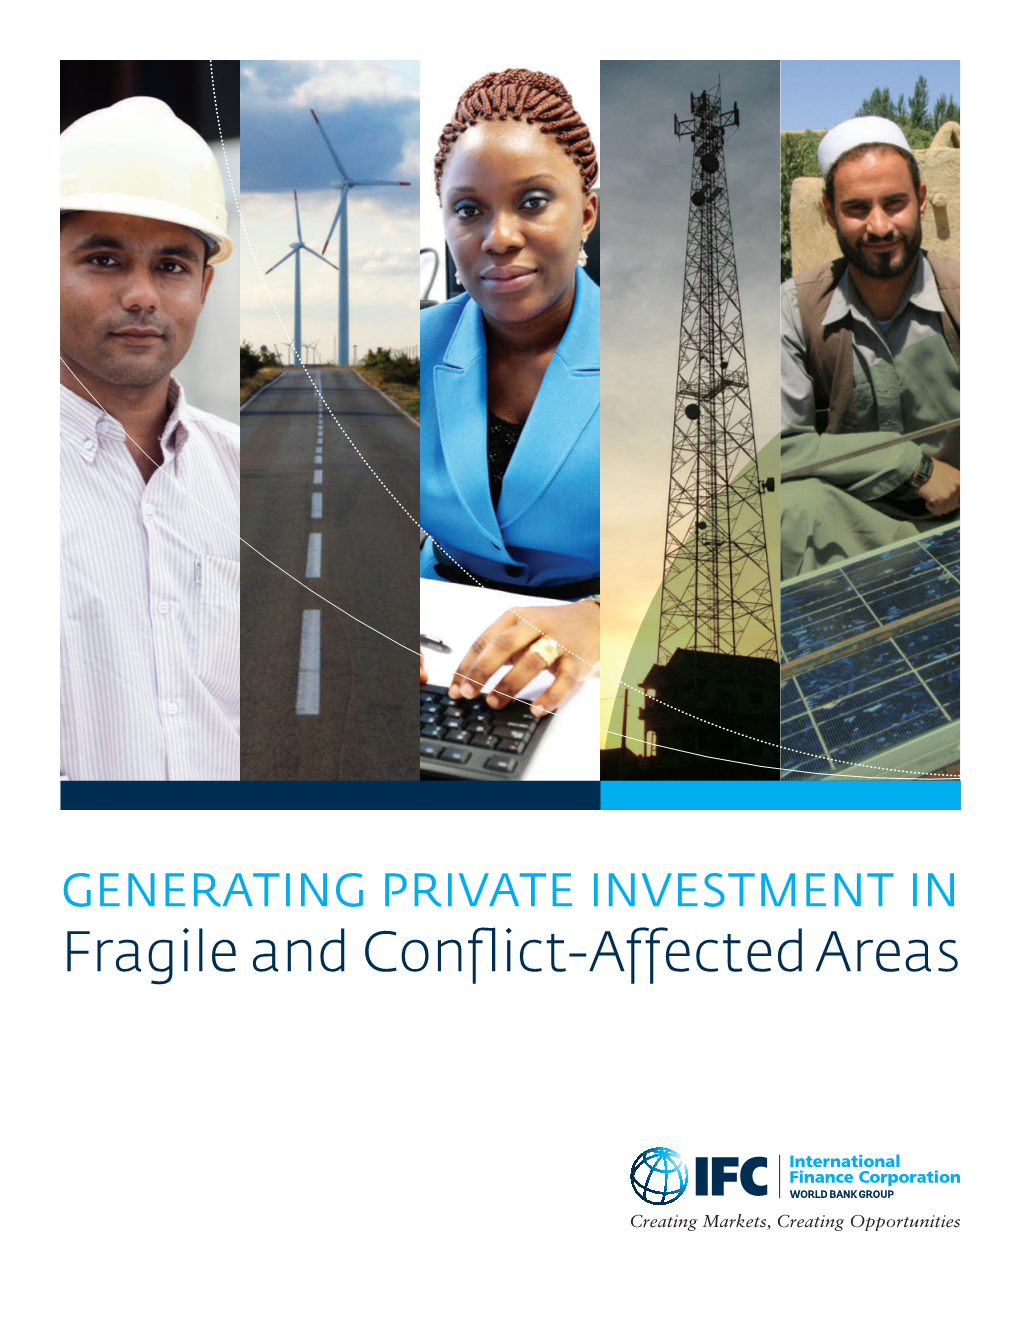 GENERATING PRIVATE INVESTMENT in Fragile and Conflict-Affected Areas